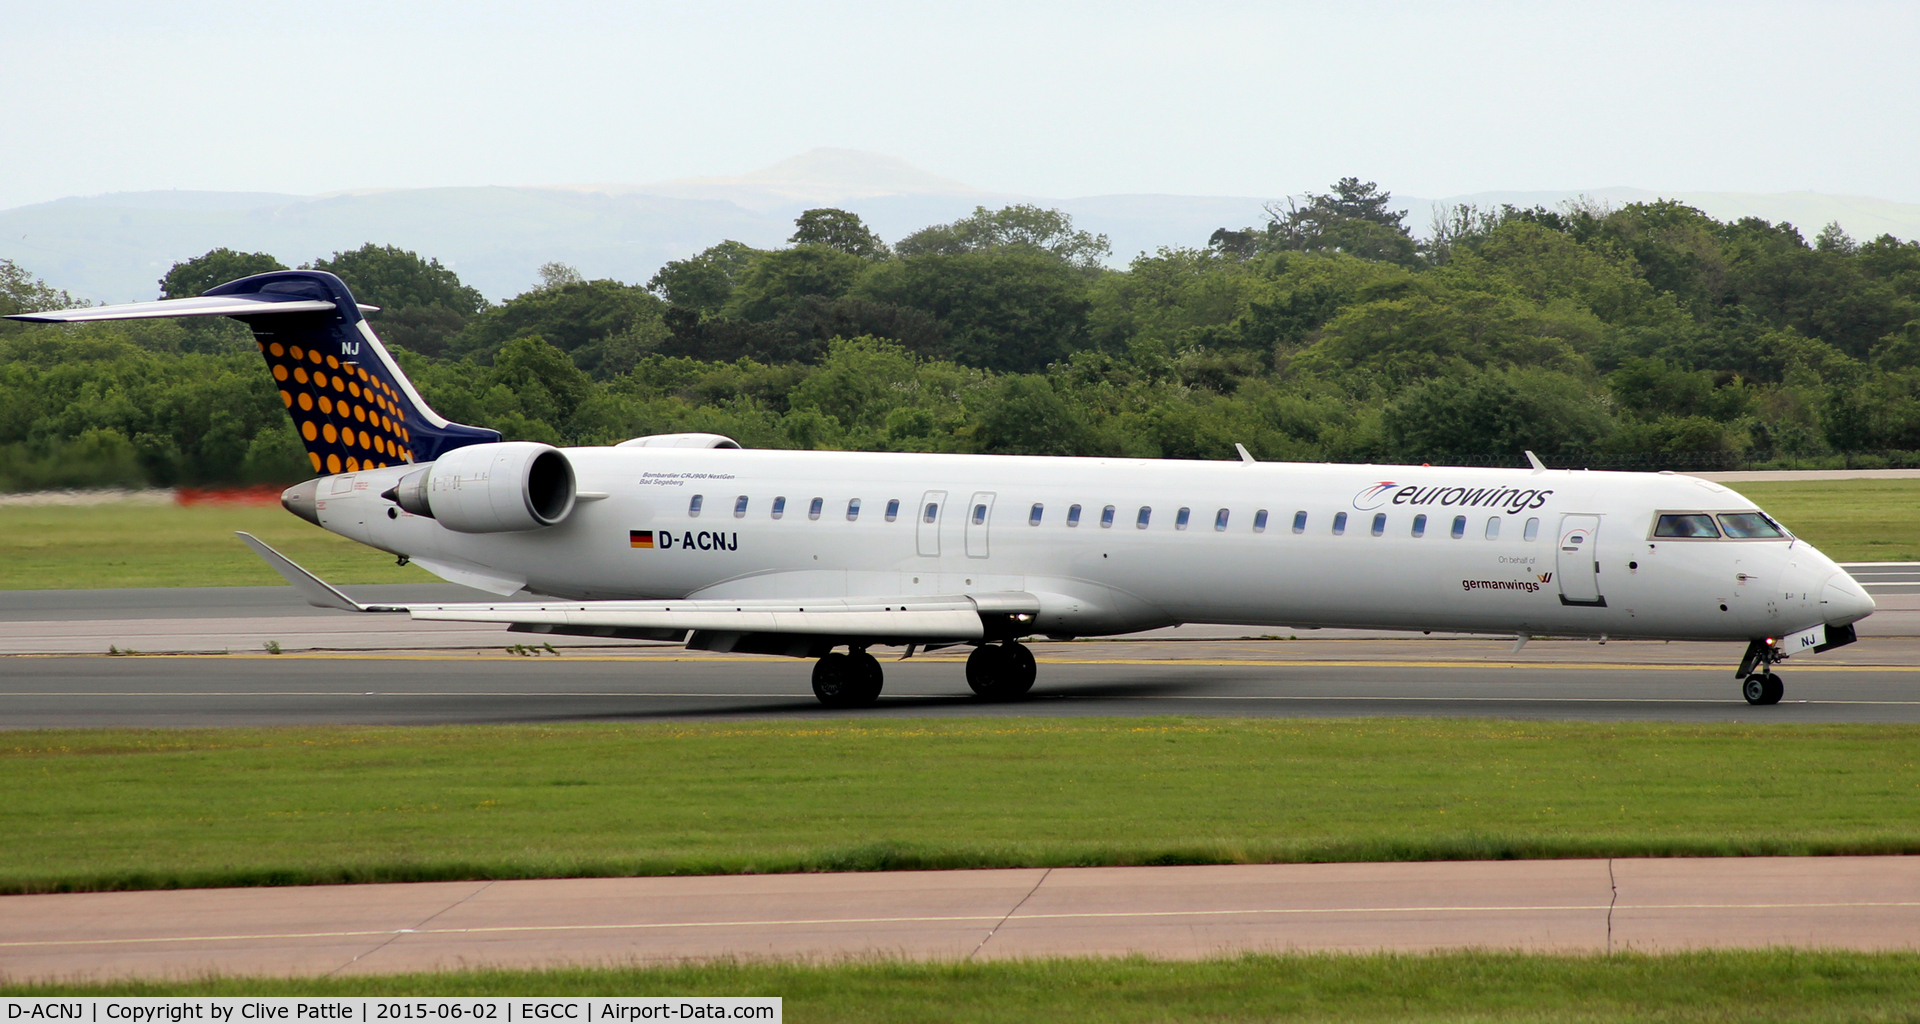 D-ACNJ, 2010 Bombardier CRJ-900 NG (CL-600-2D24) C/N 15249, Moments after arrival at Manchester Airport EGCC